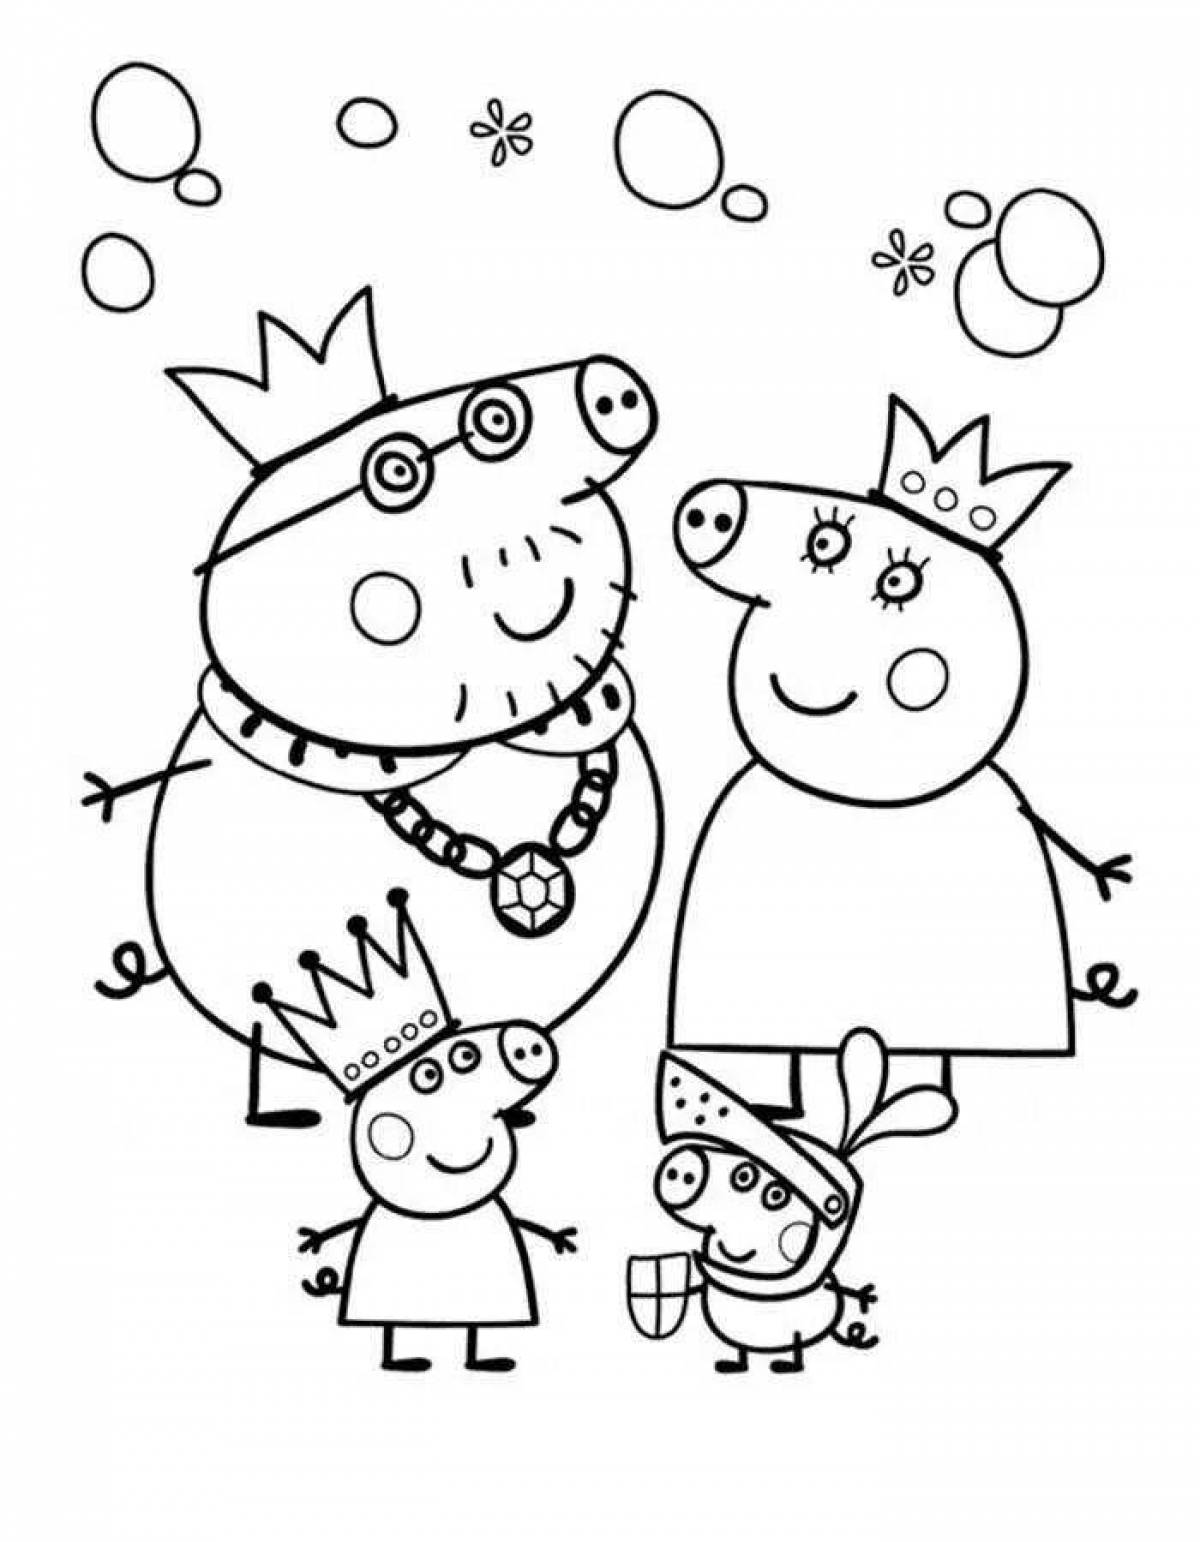 Colorful bright peppa coloring page